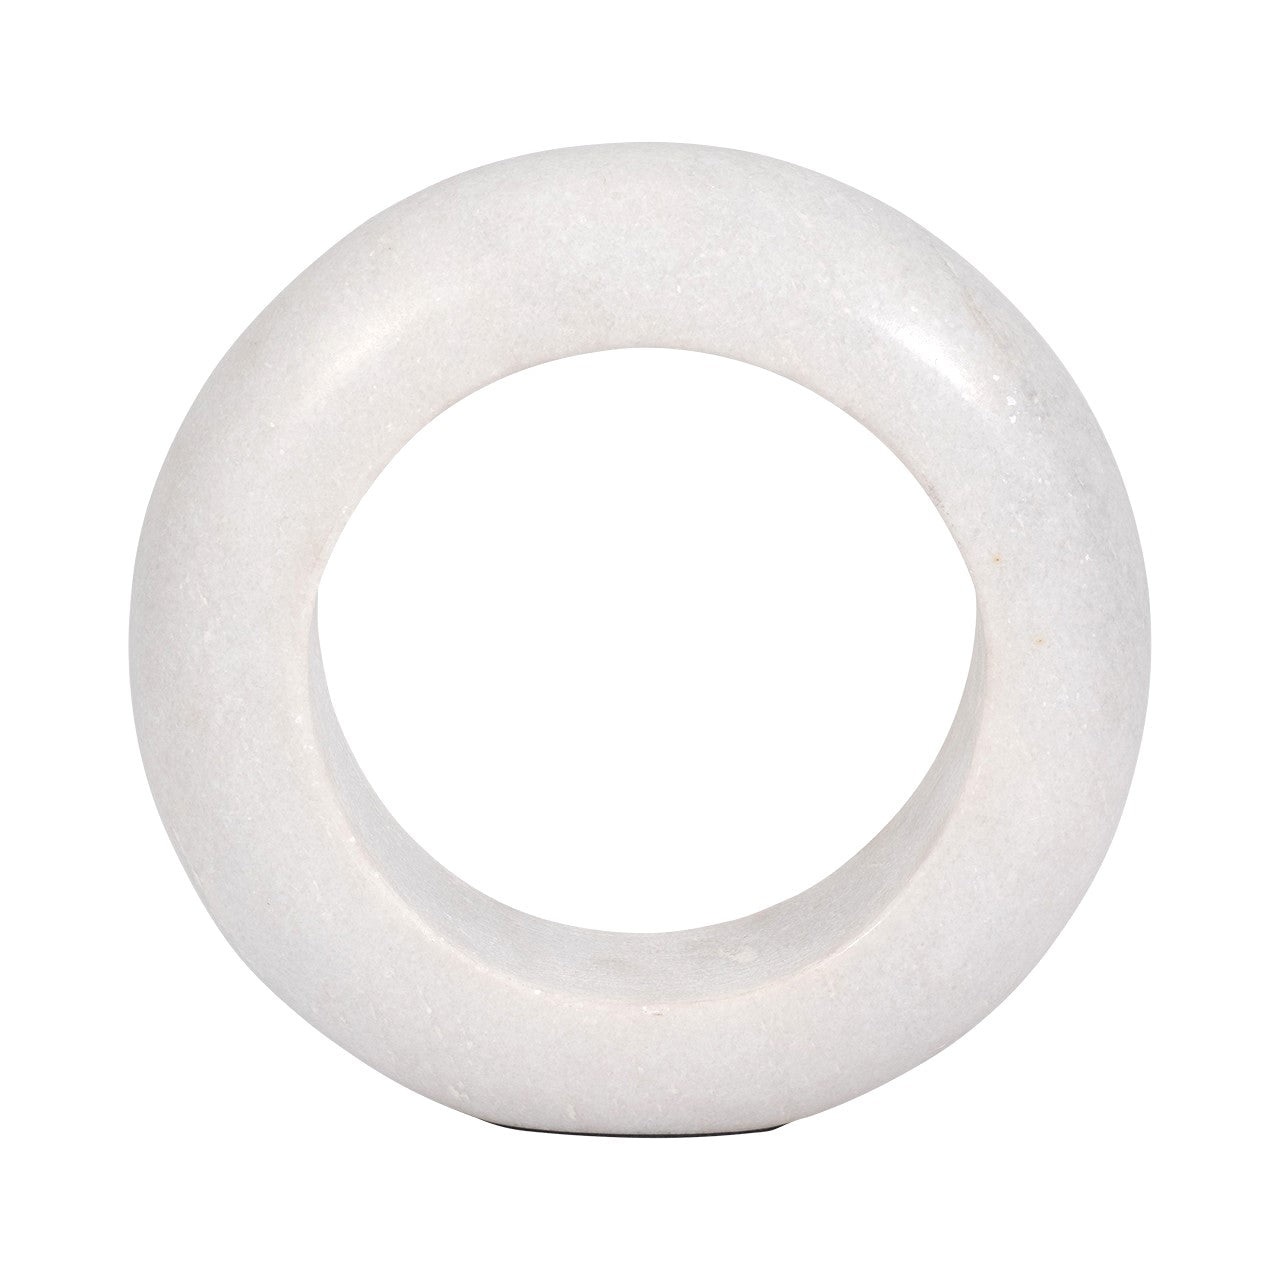 MARBLE RING TABLETOP DECOR